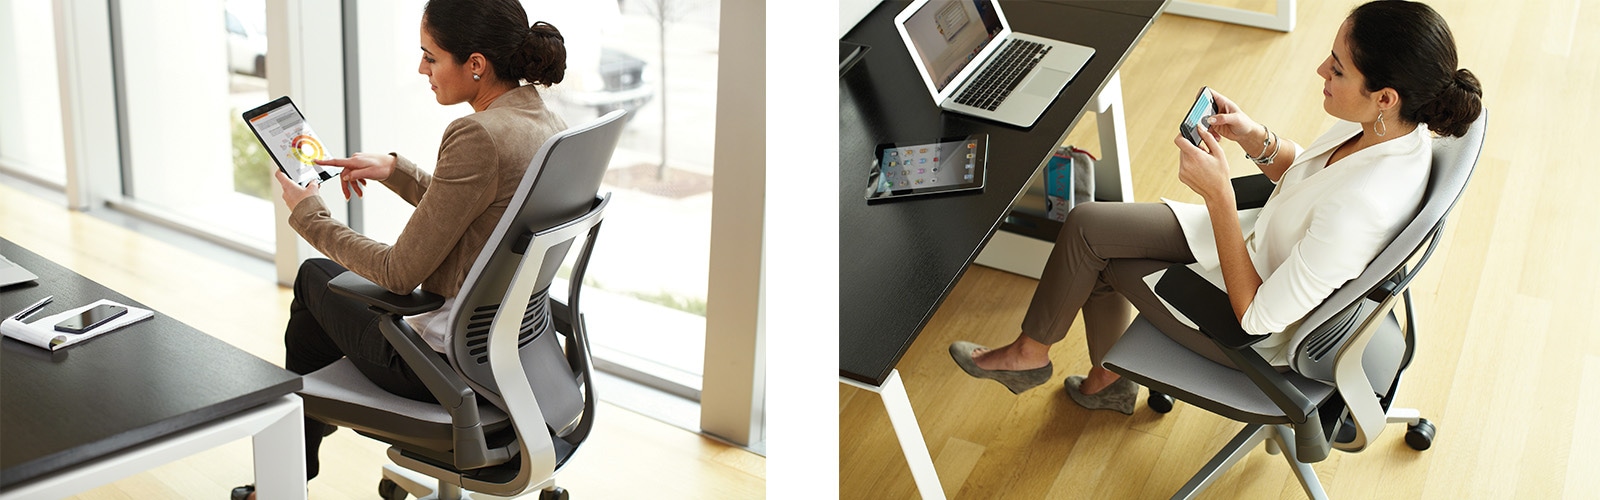 Steelcase Gesture chair is the perfect ergonomic office furniture solution